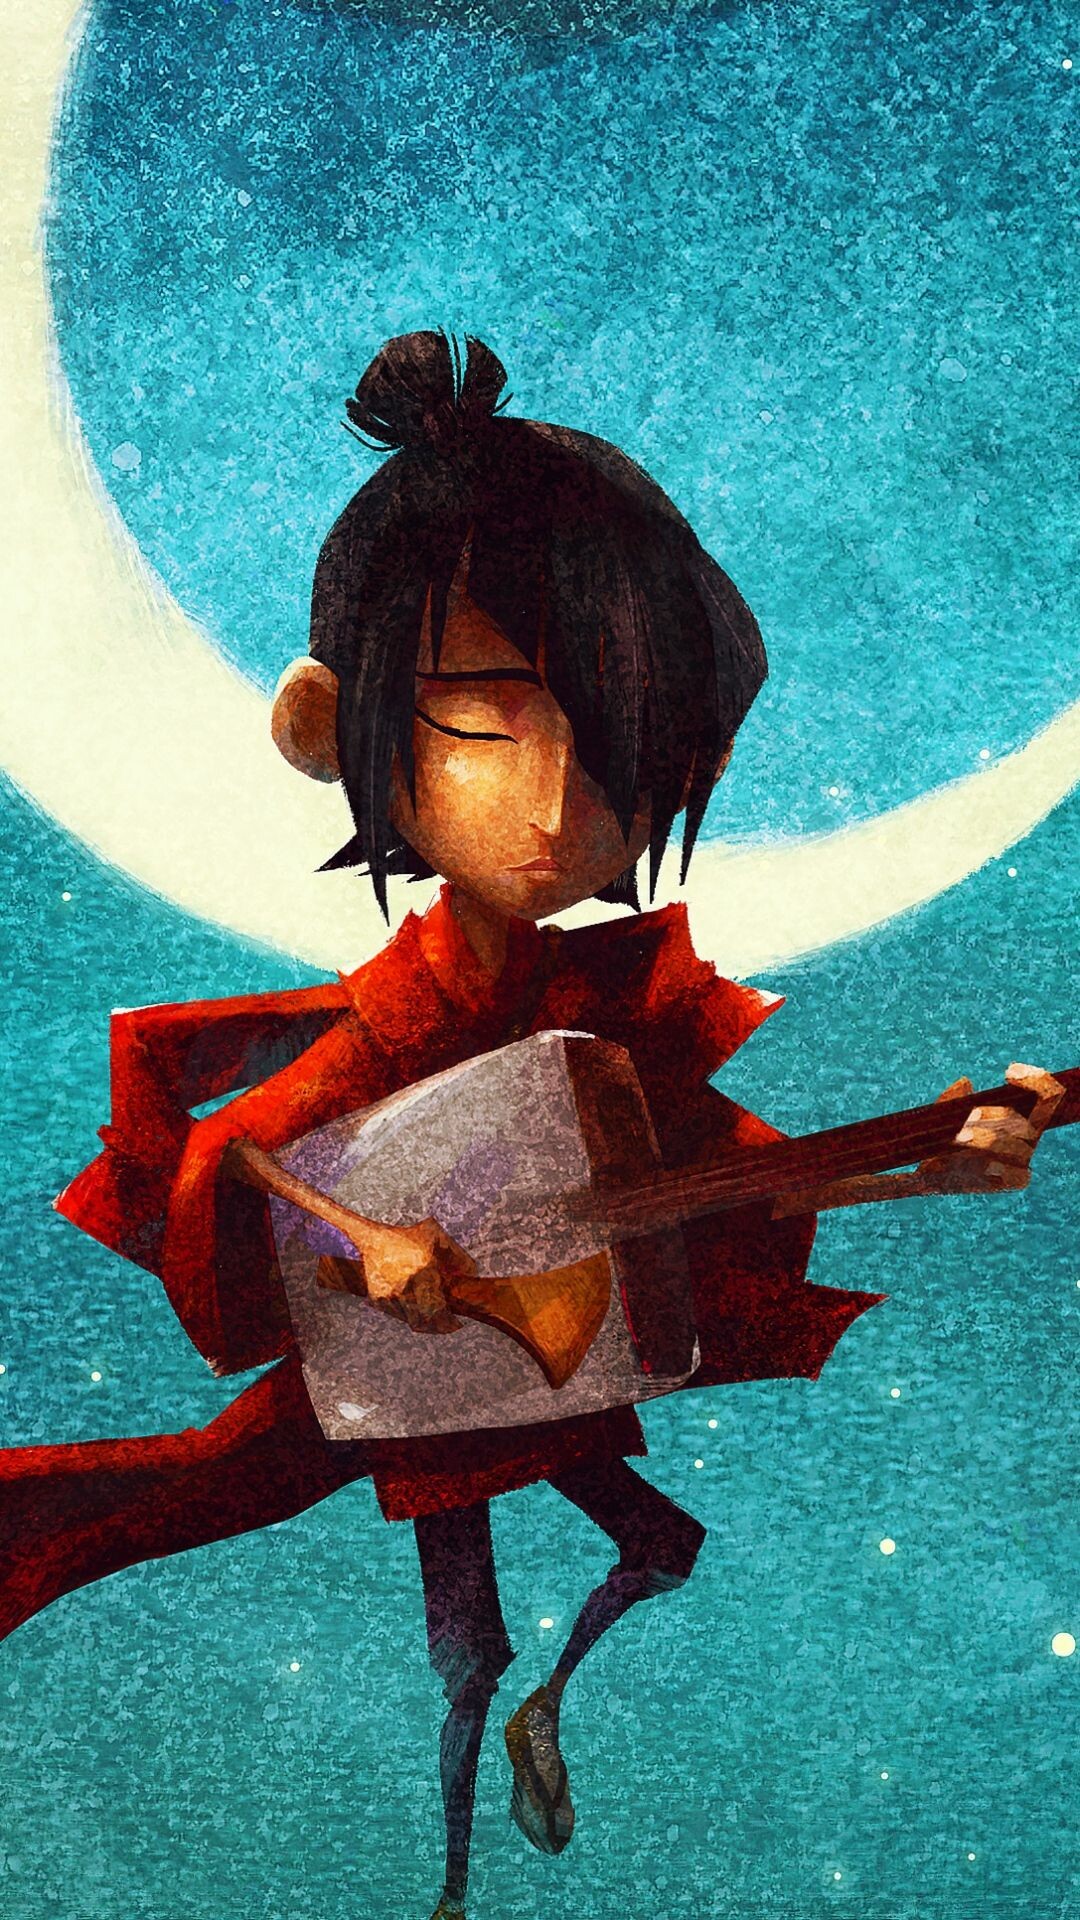 Kubo and the Two Strings: A story of a 12-year-old boy with only one eye, Set in feudal Japan. 1080x1920 Full HD Background.